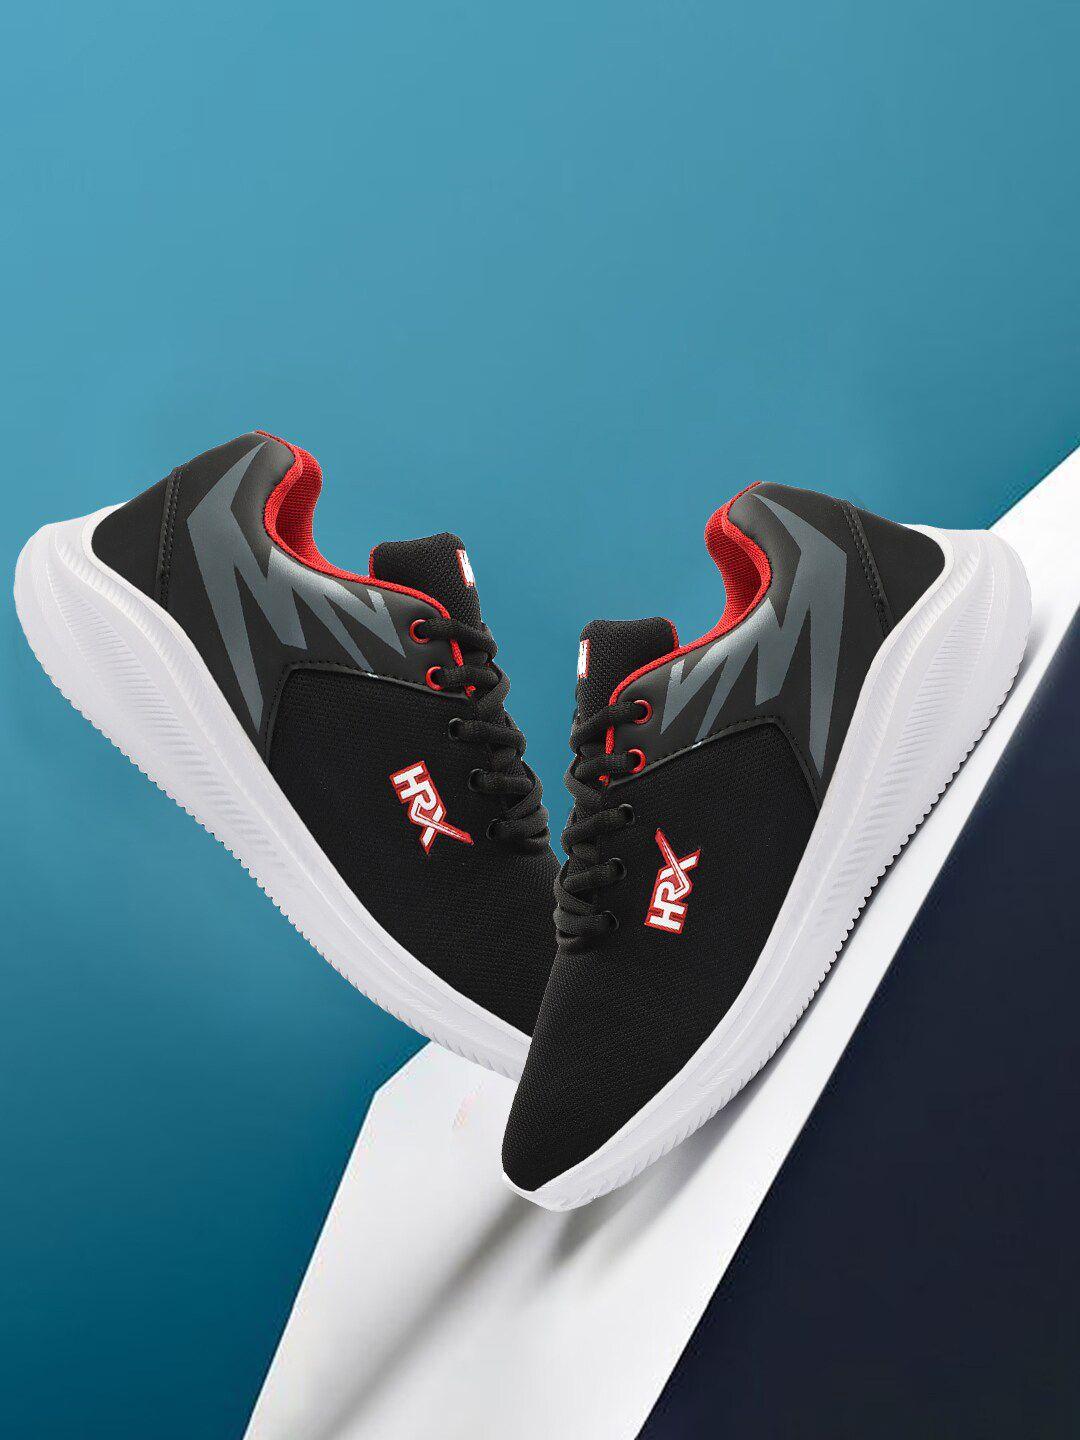 hrx by hrithik roshan men black and red mesh running sports shoes